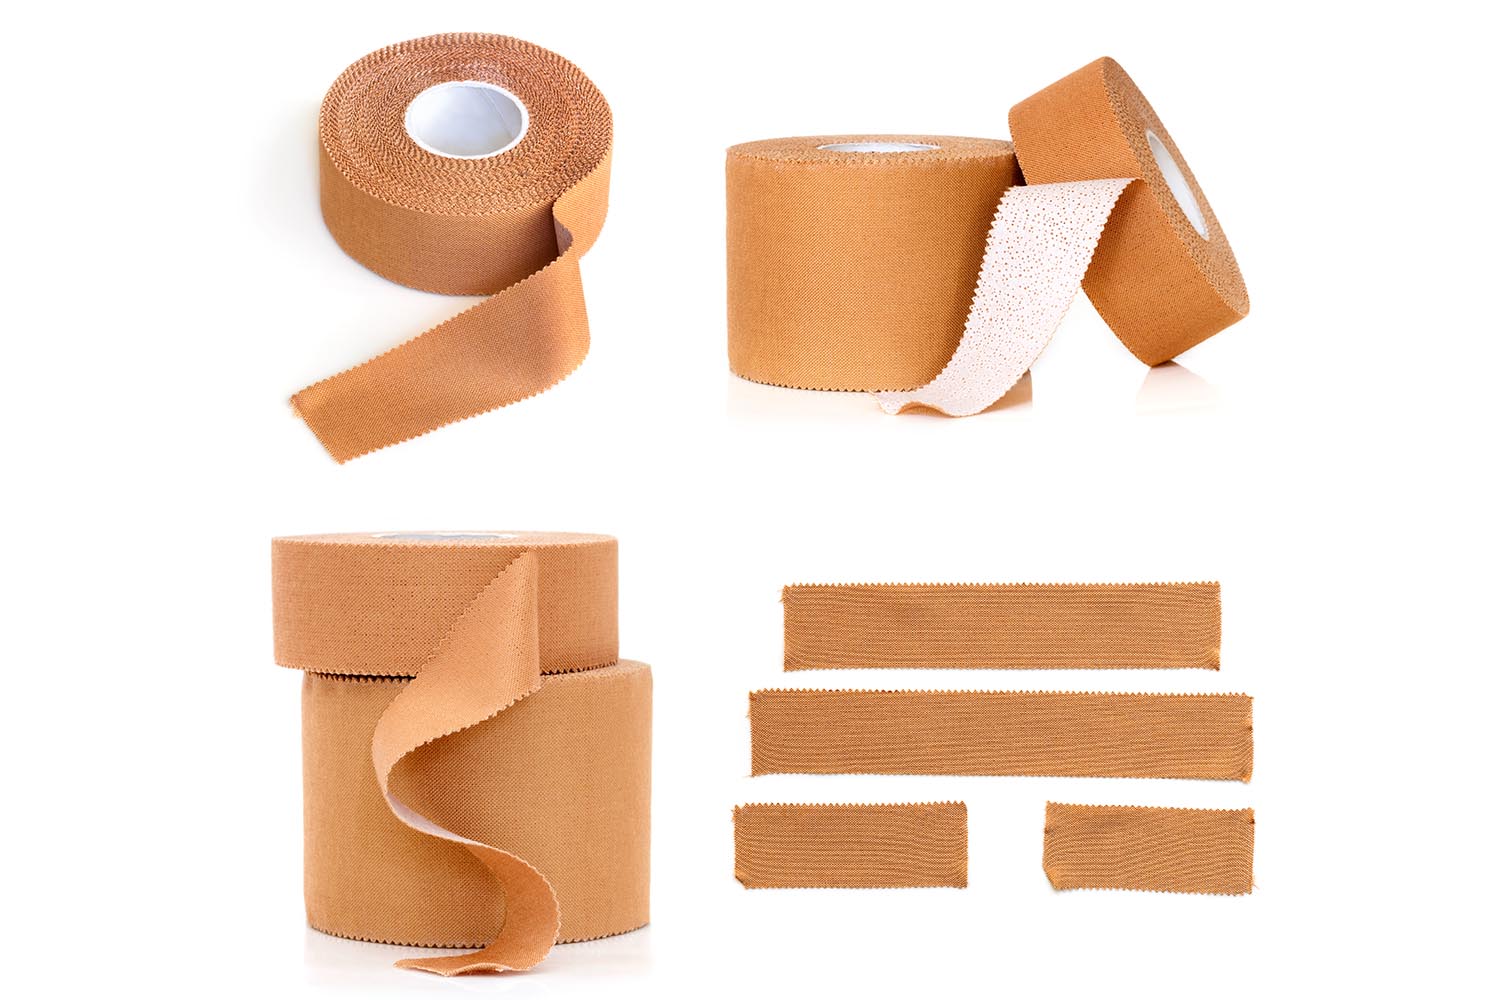 sports medical tape